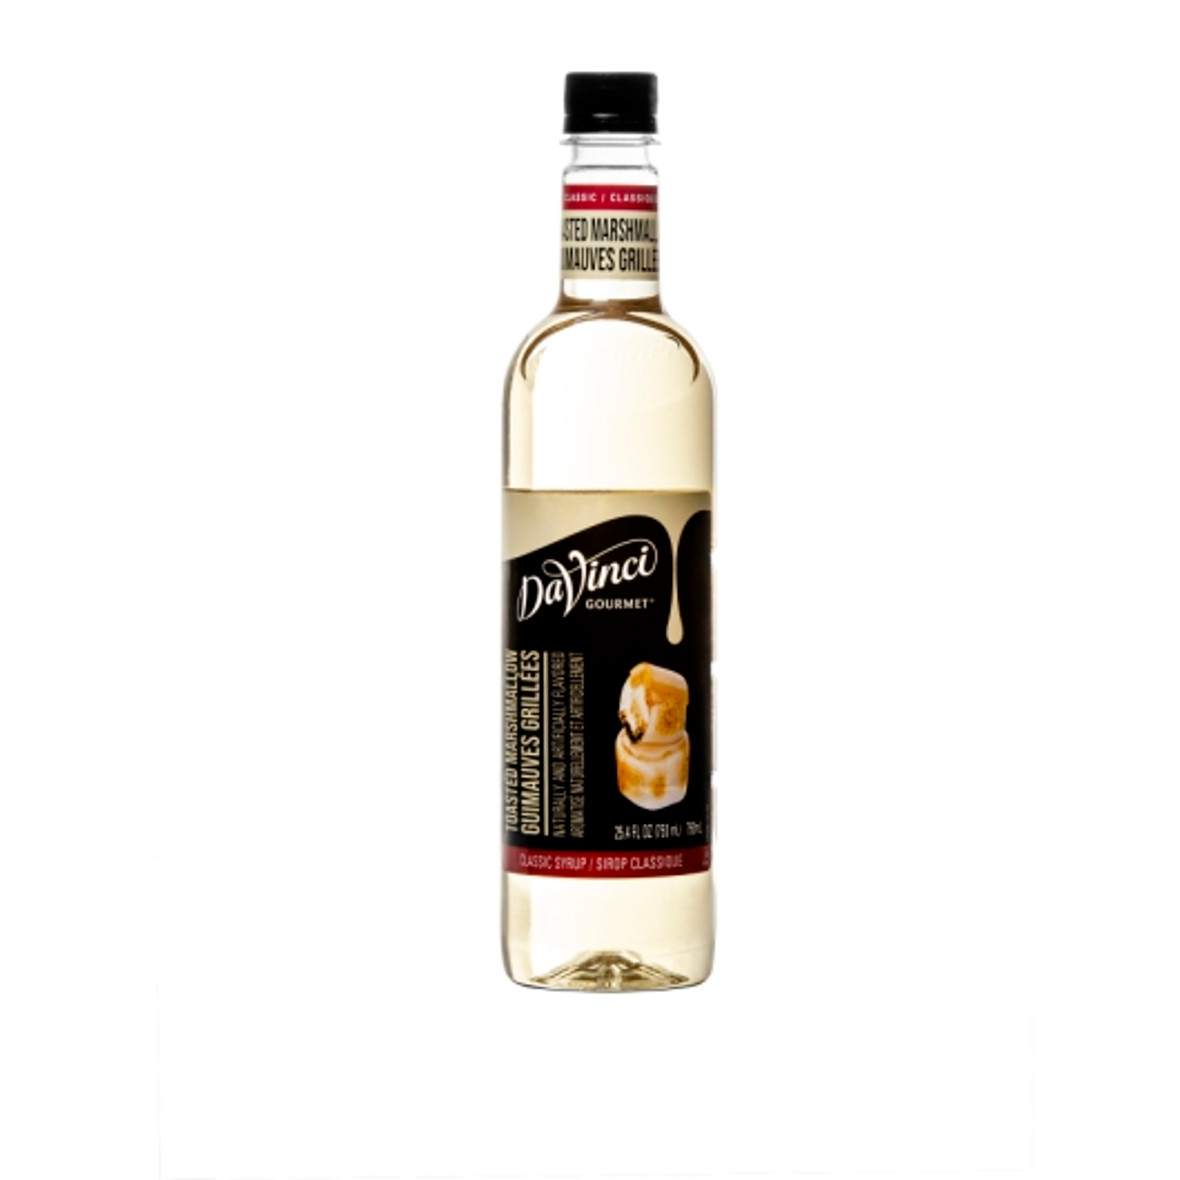 Davinci Gourmet Syrup Toasted Marshmallow Flavored, 750 Milliliter, 4 Per Case